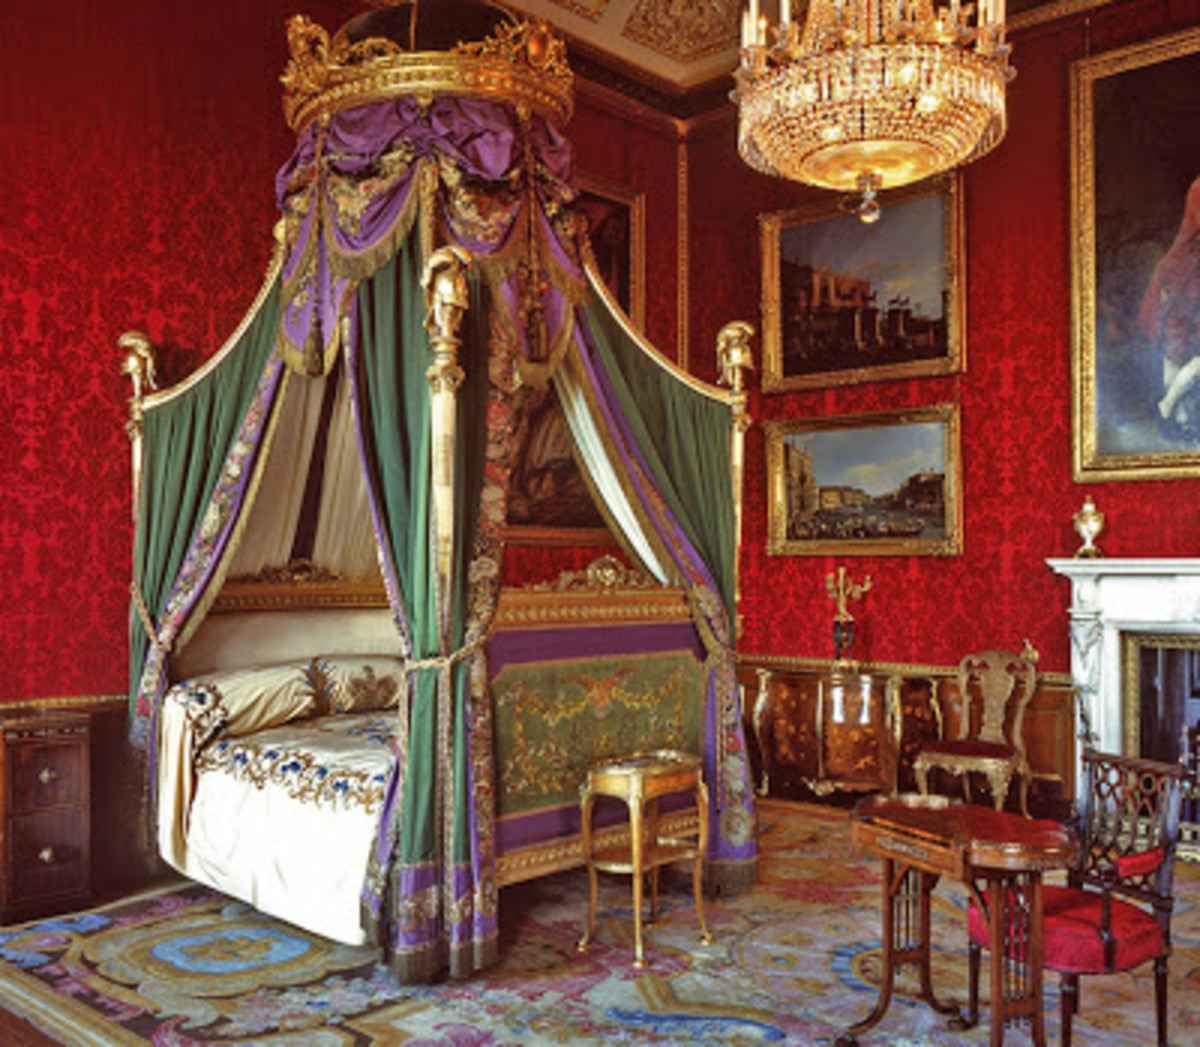 The Kings Bed Chamber